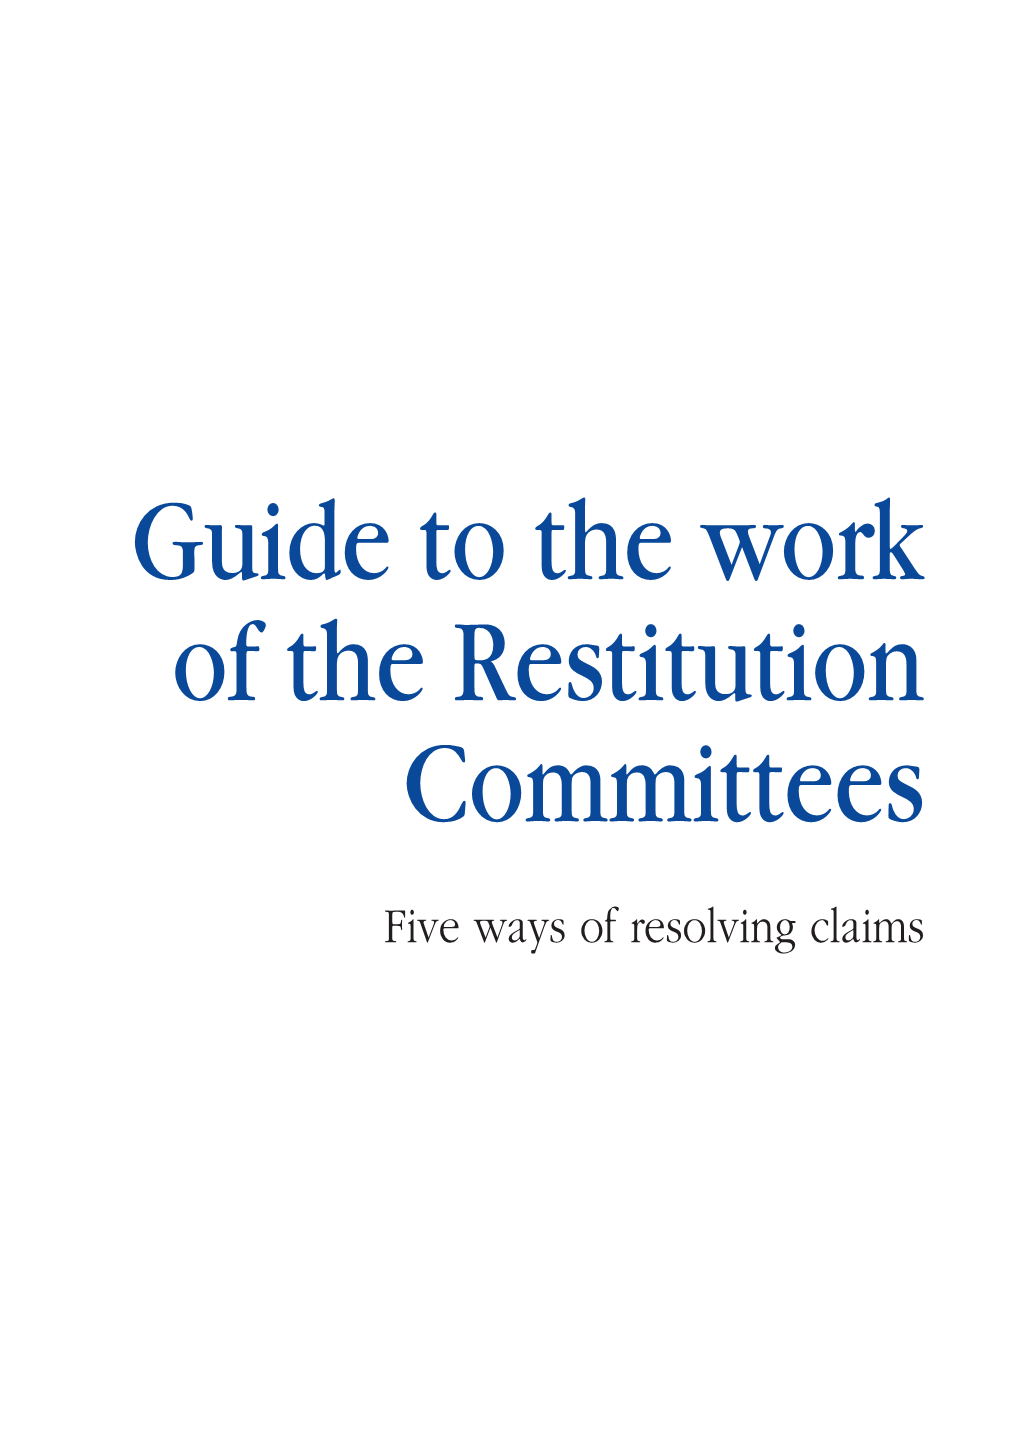 Guide to the Work of the Restitution Committees